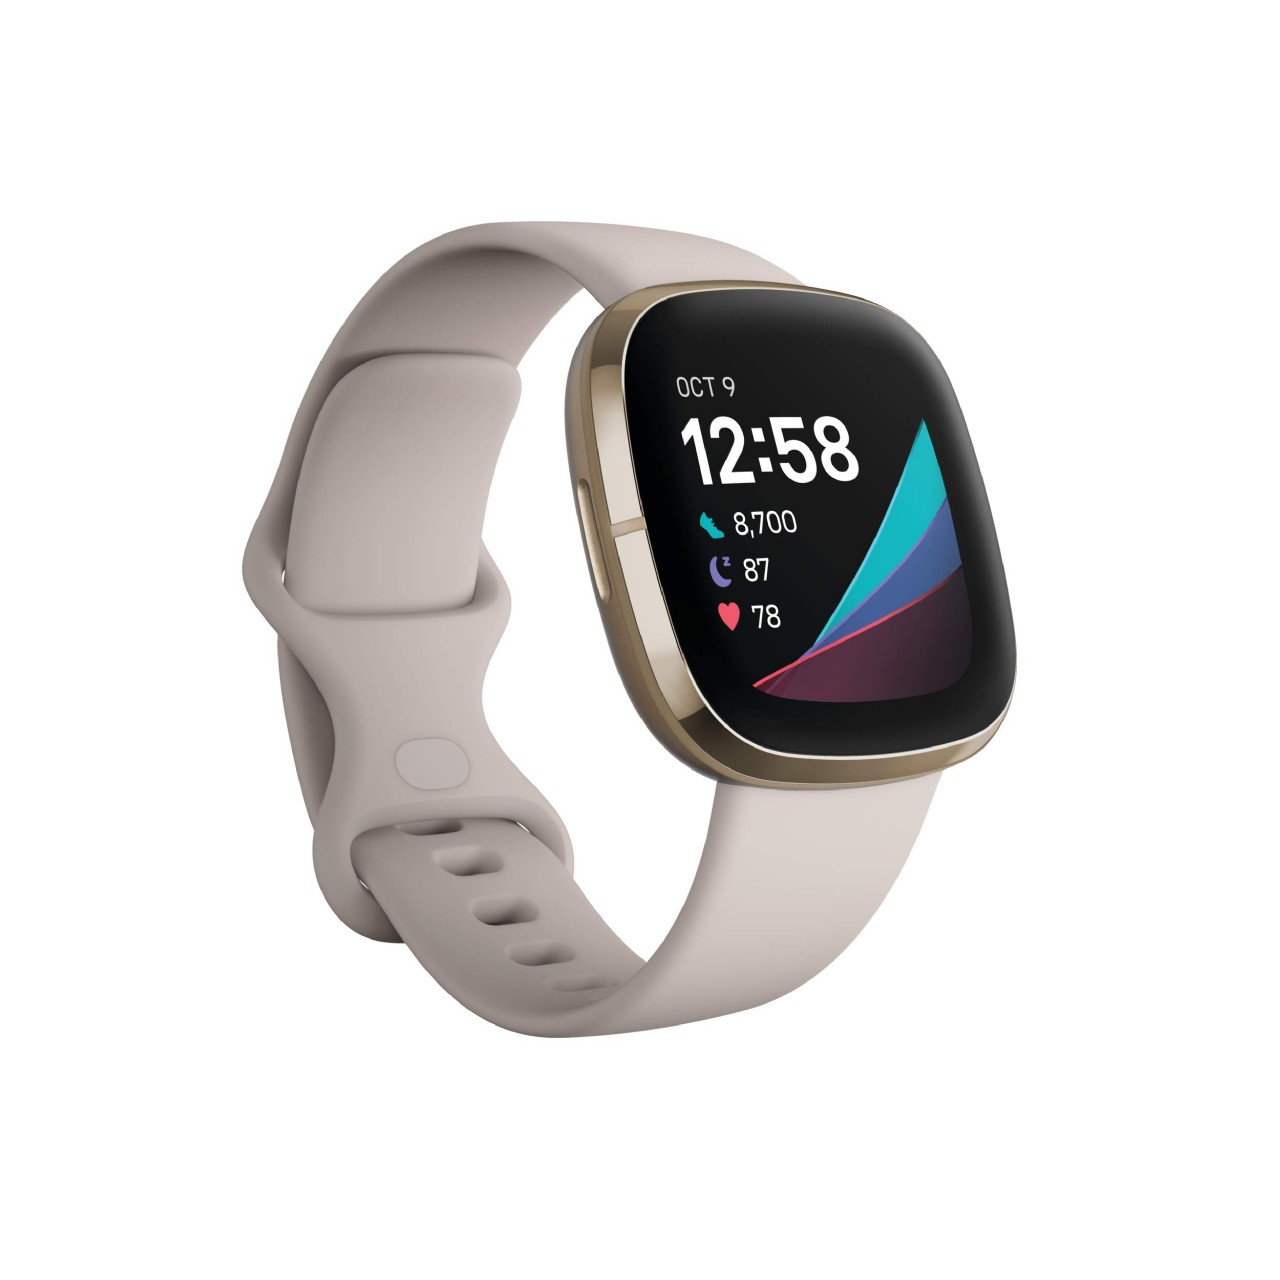 The Fitbit Sense has a battery life